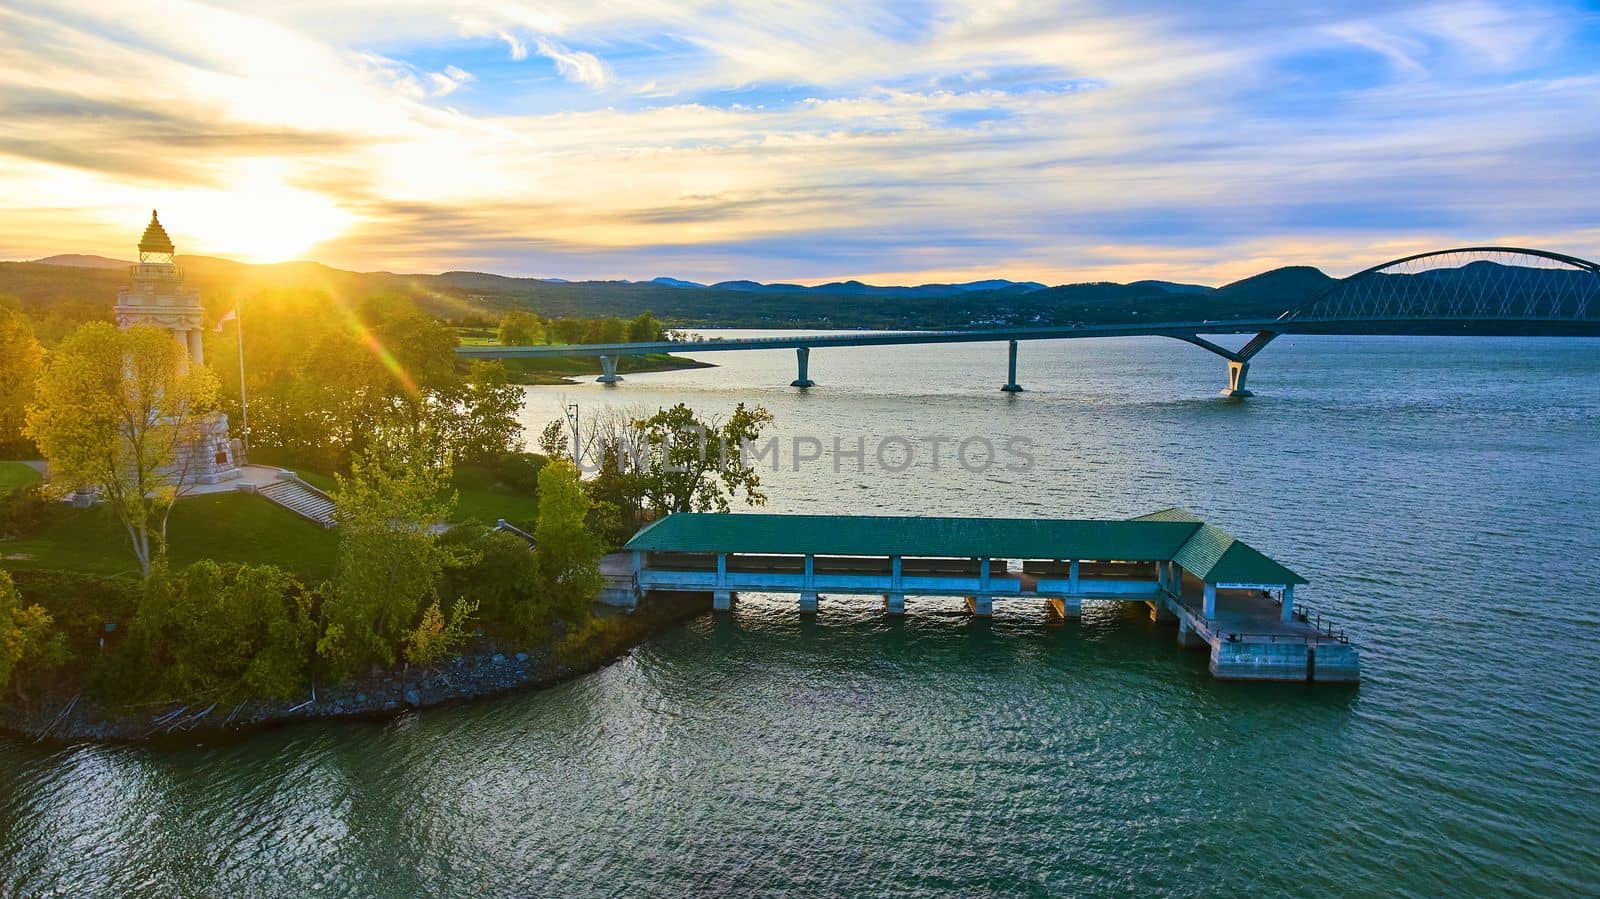 Image of Tower and docks with bridge connecting New York to Vermont and sun setting behind mountains